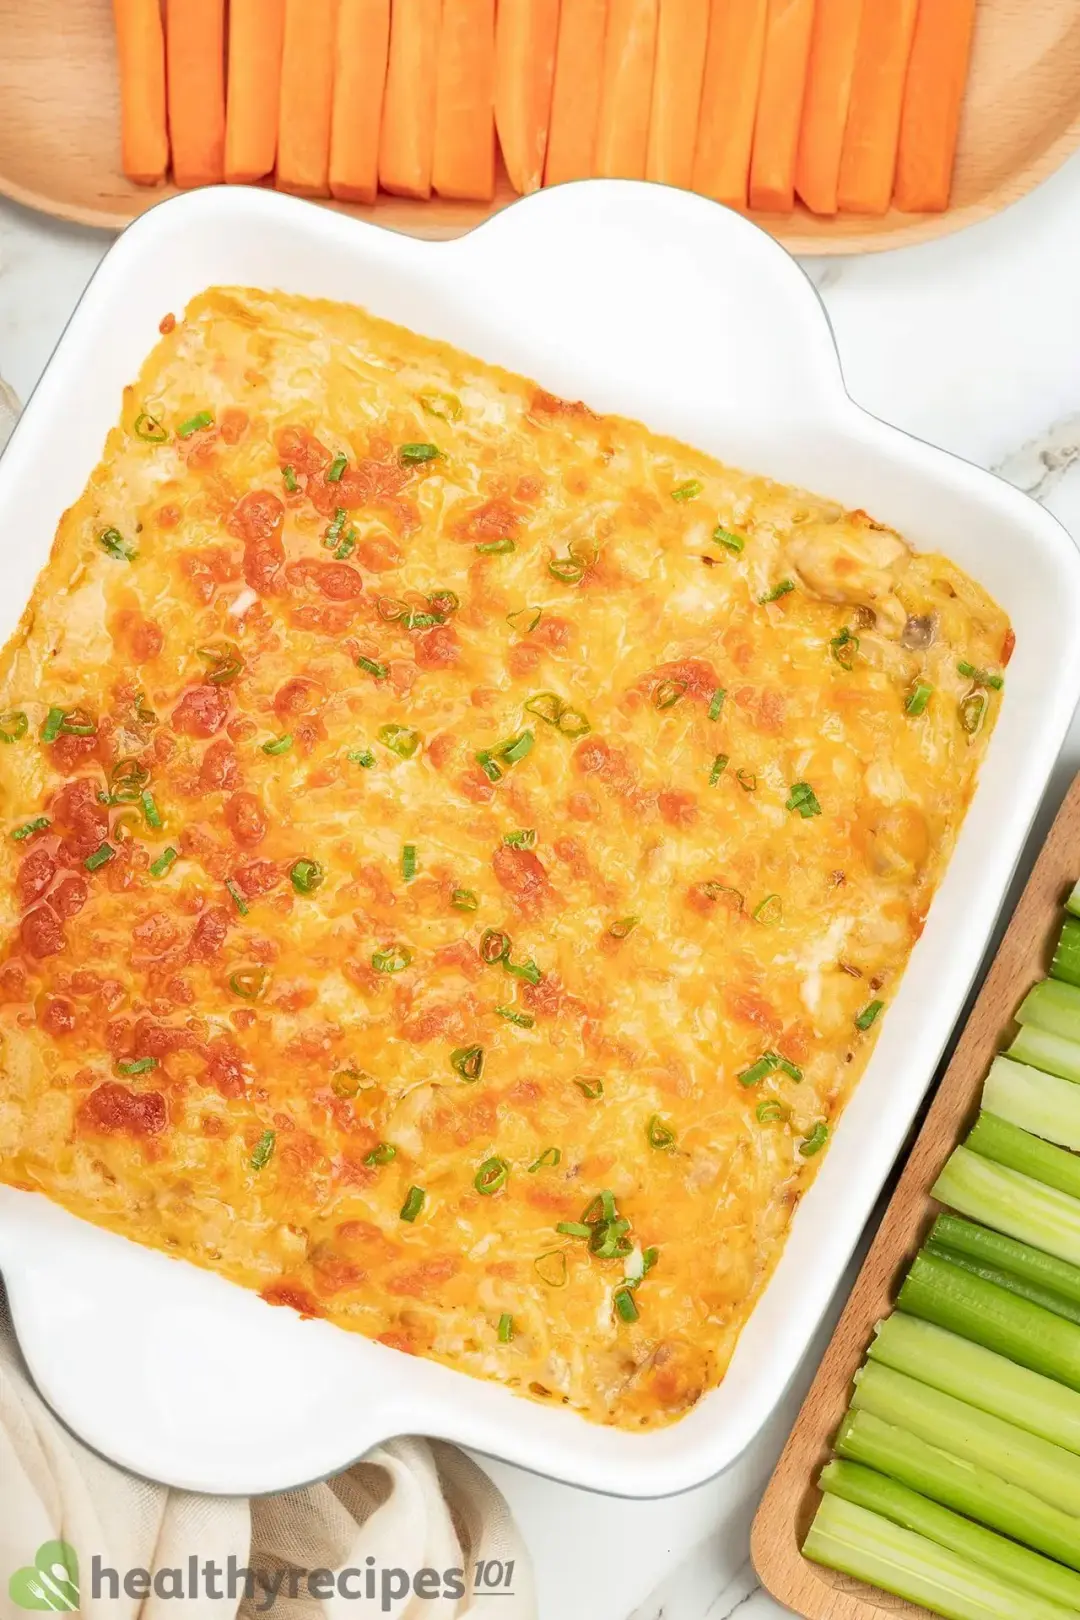 How Long Is Buffalo Chicken Dip Good for